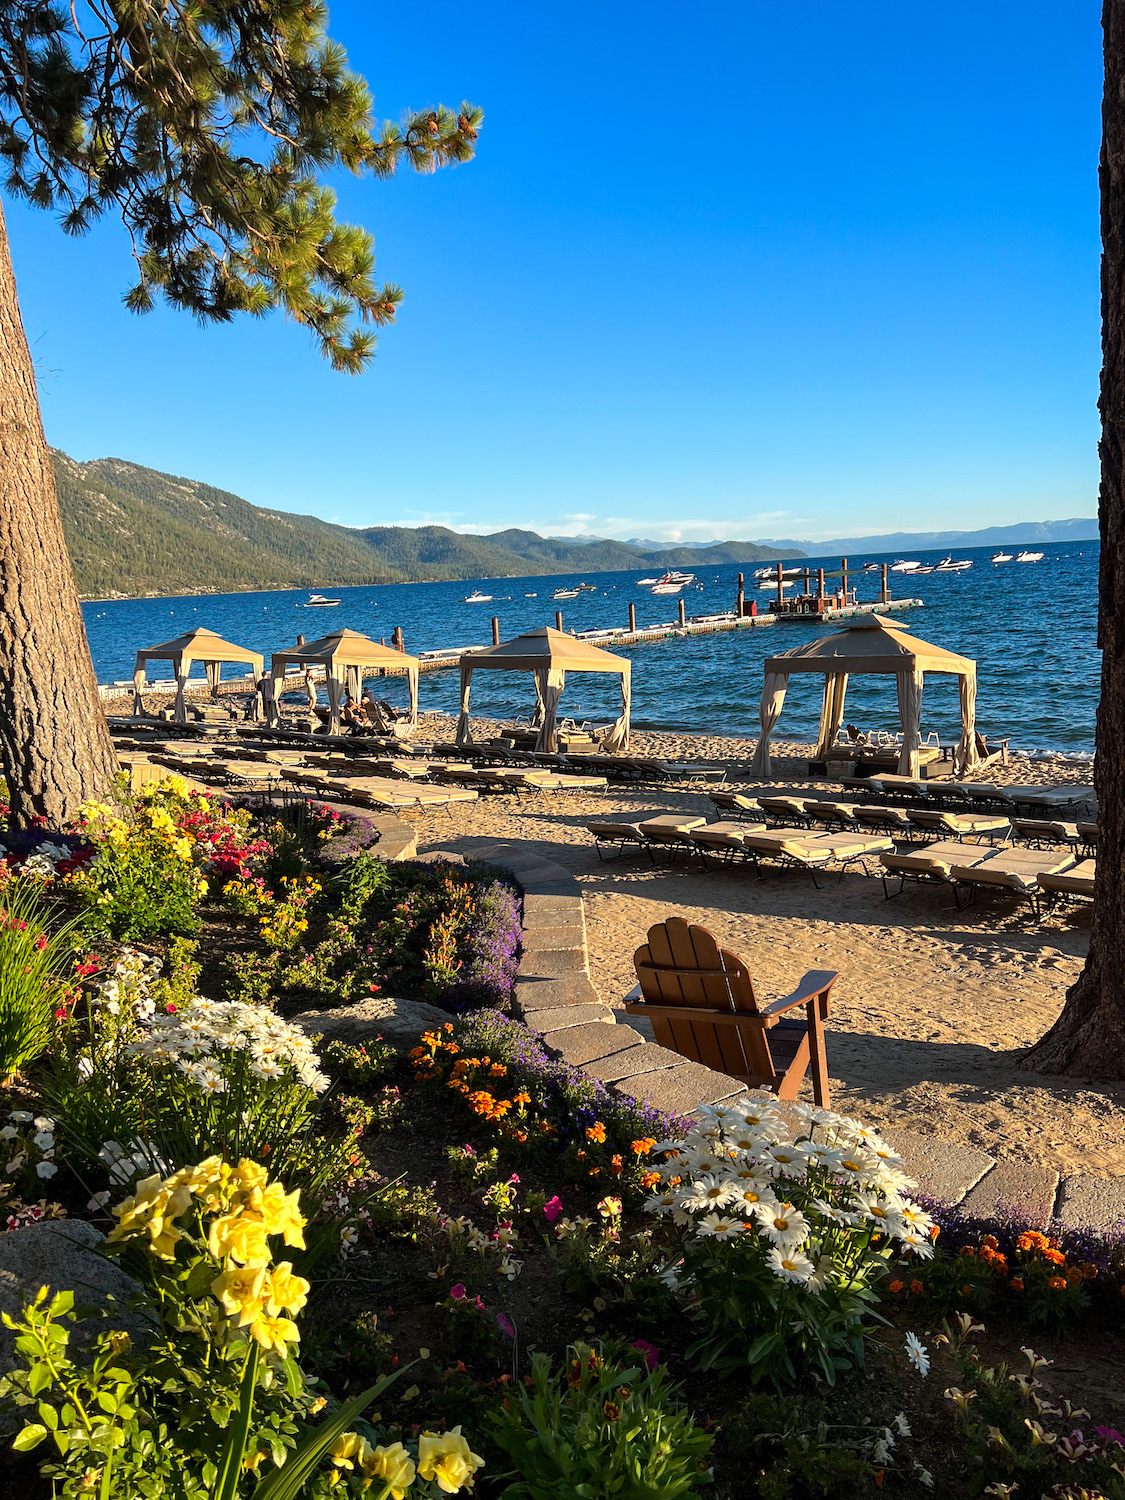 Things to do in North Lake Tahoe in summer